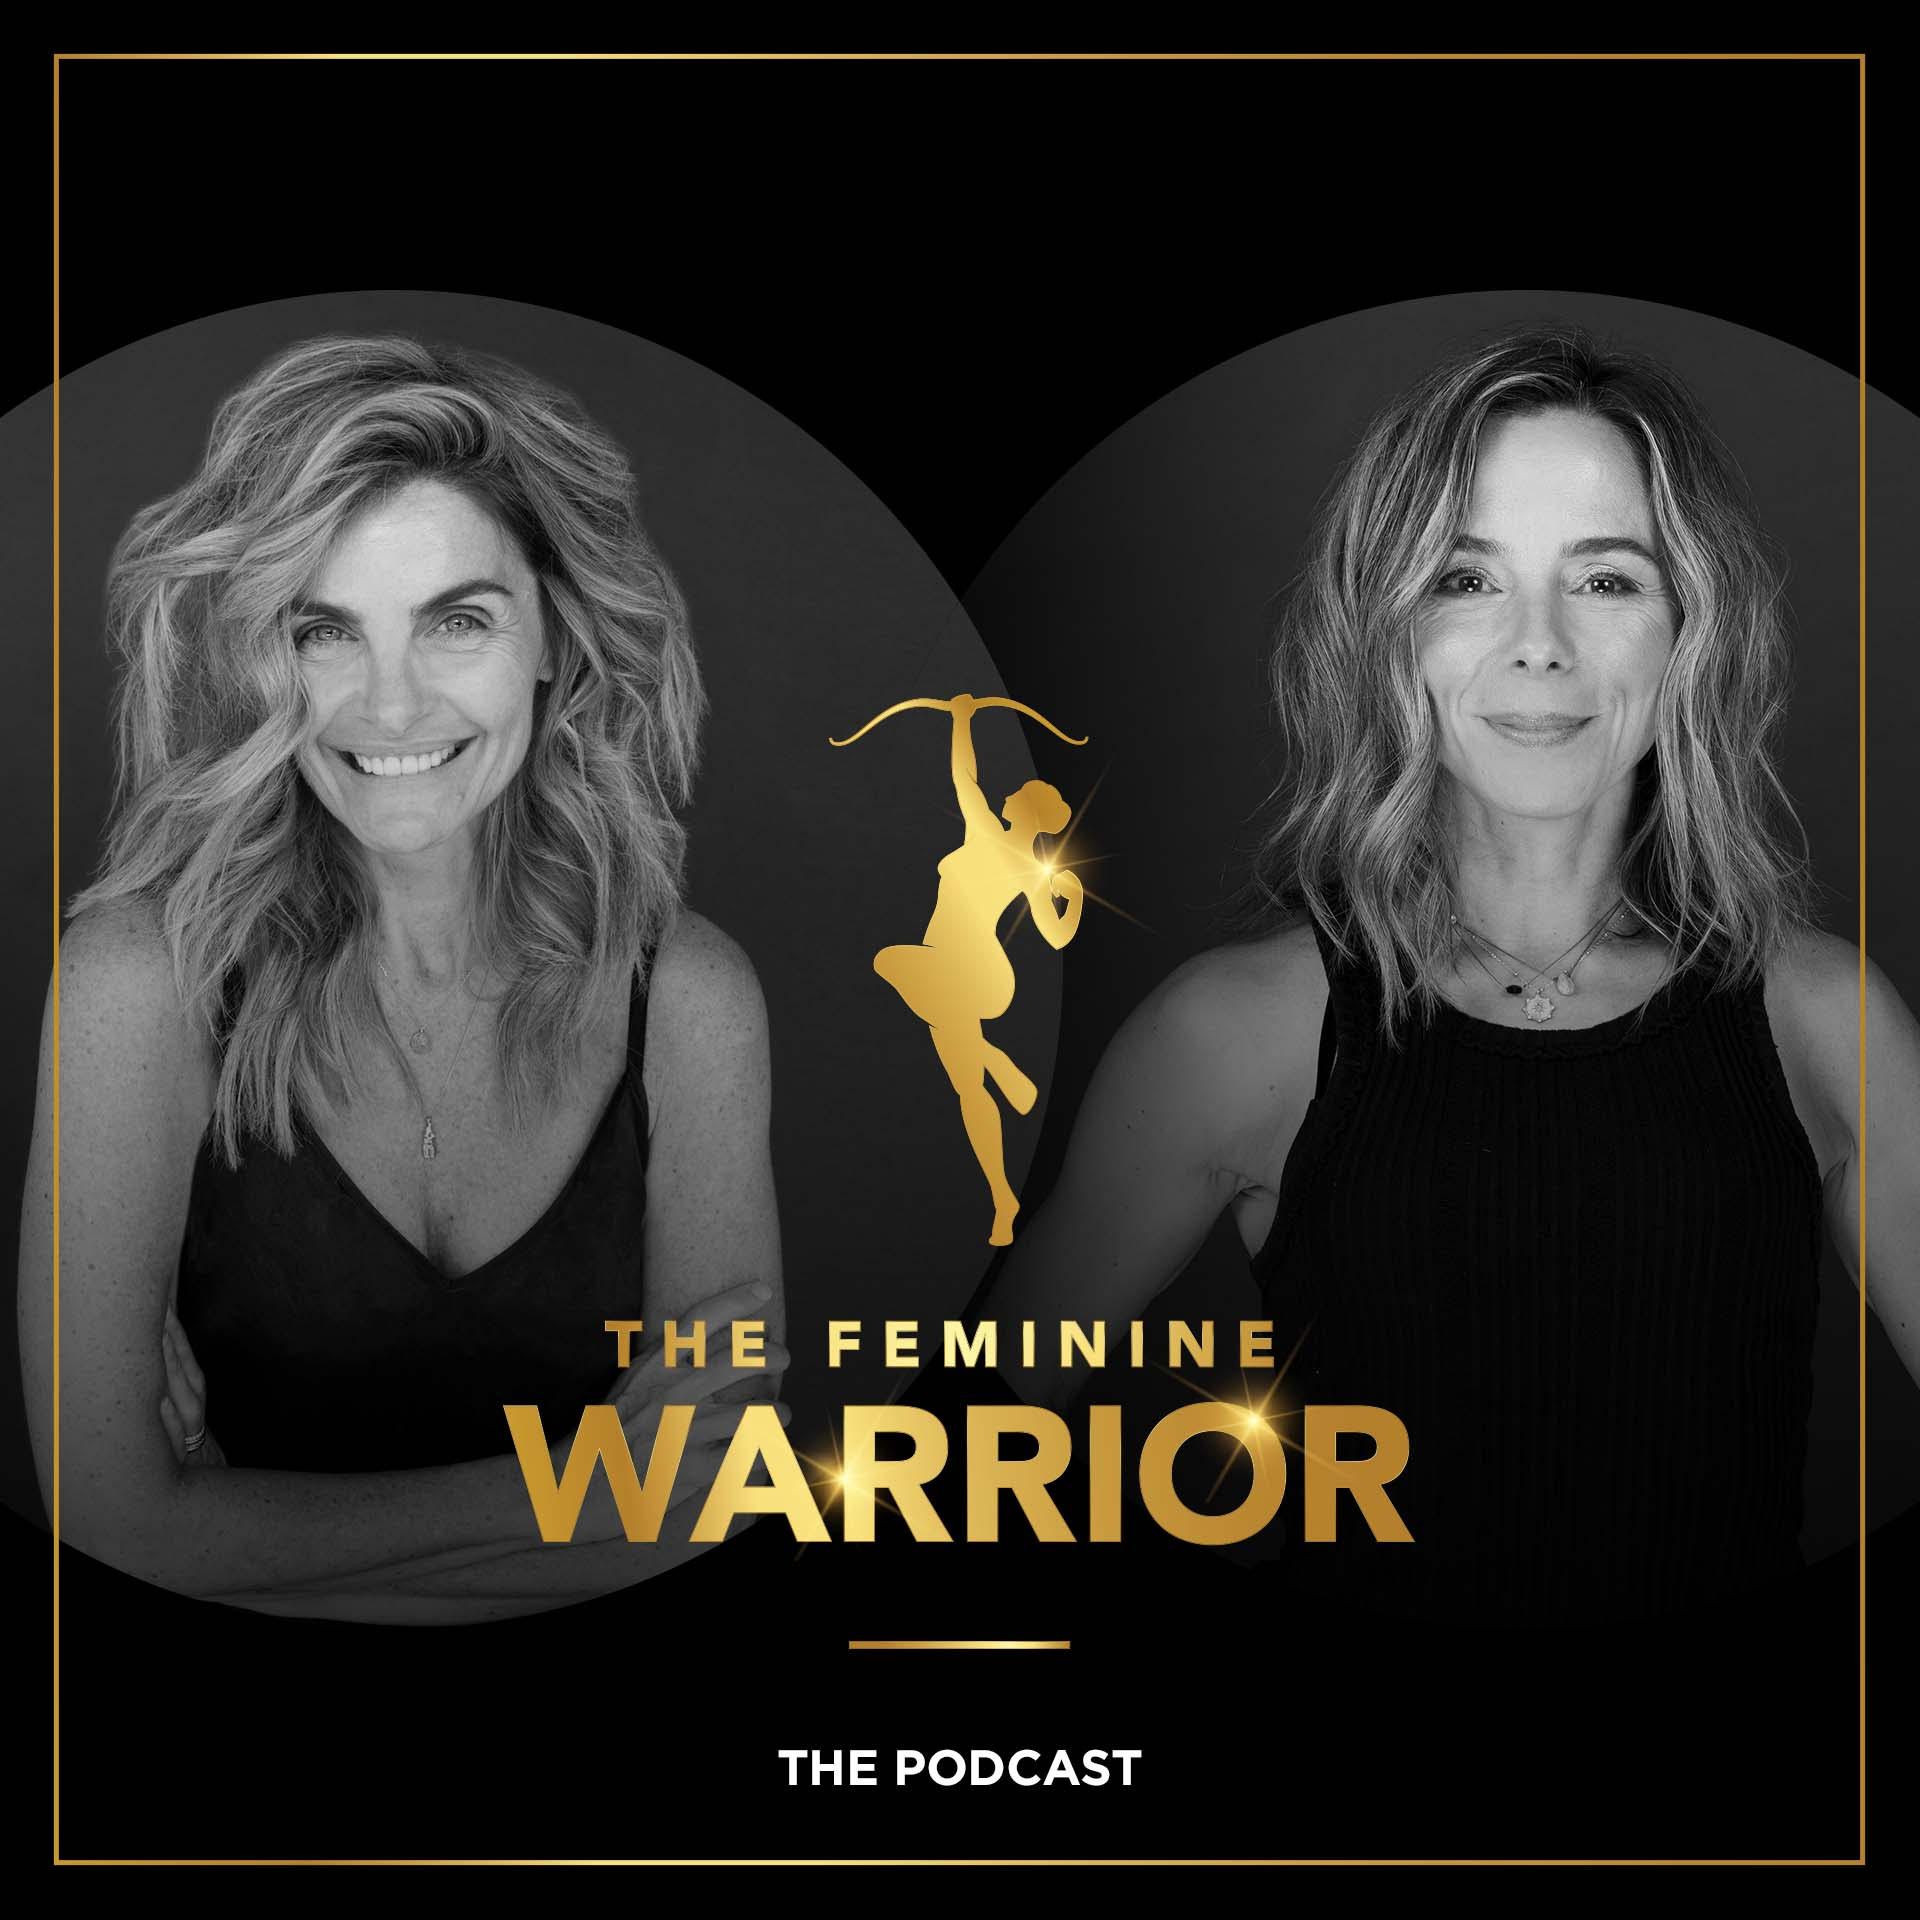 The Feminine Warrior Podcast with Helen Tansey and Dianne Wiseman